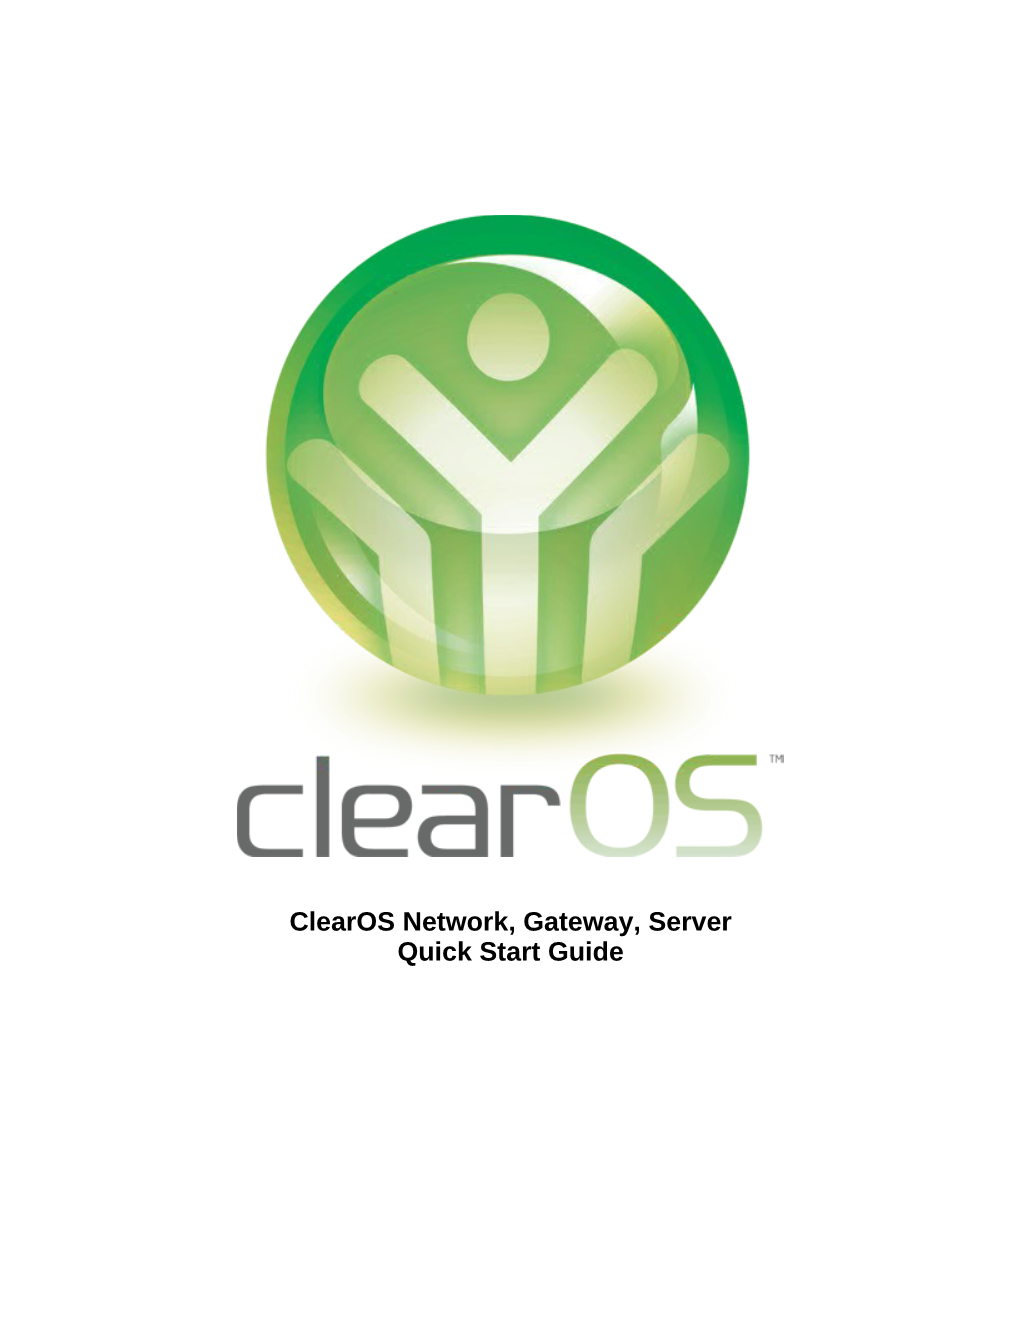 Clearos Network, Gateway, Server Quick Start Guide Welcome